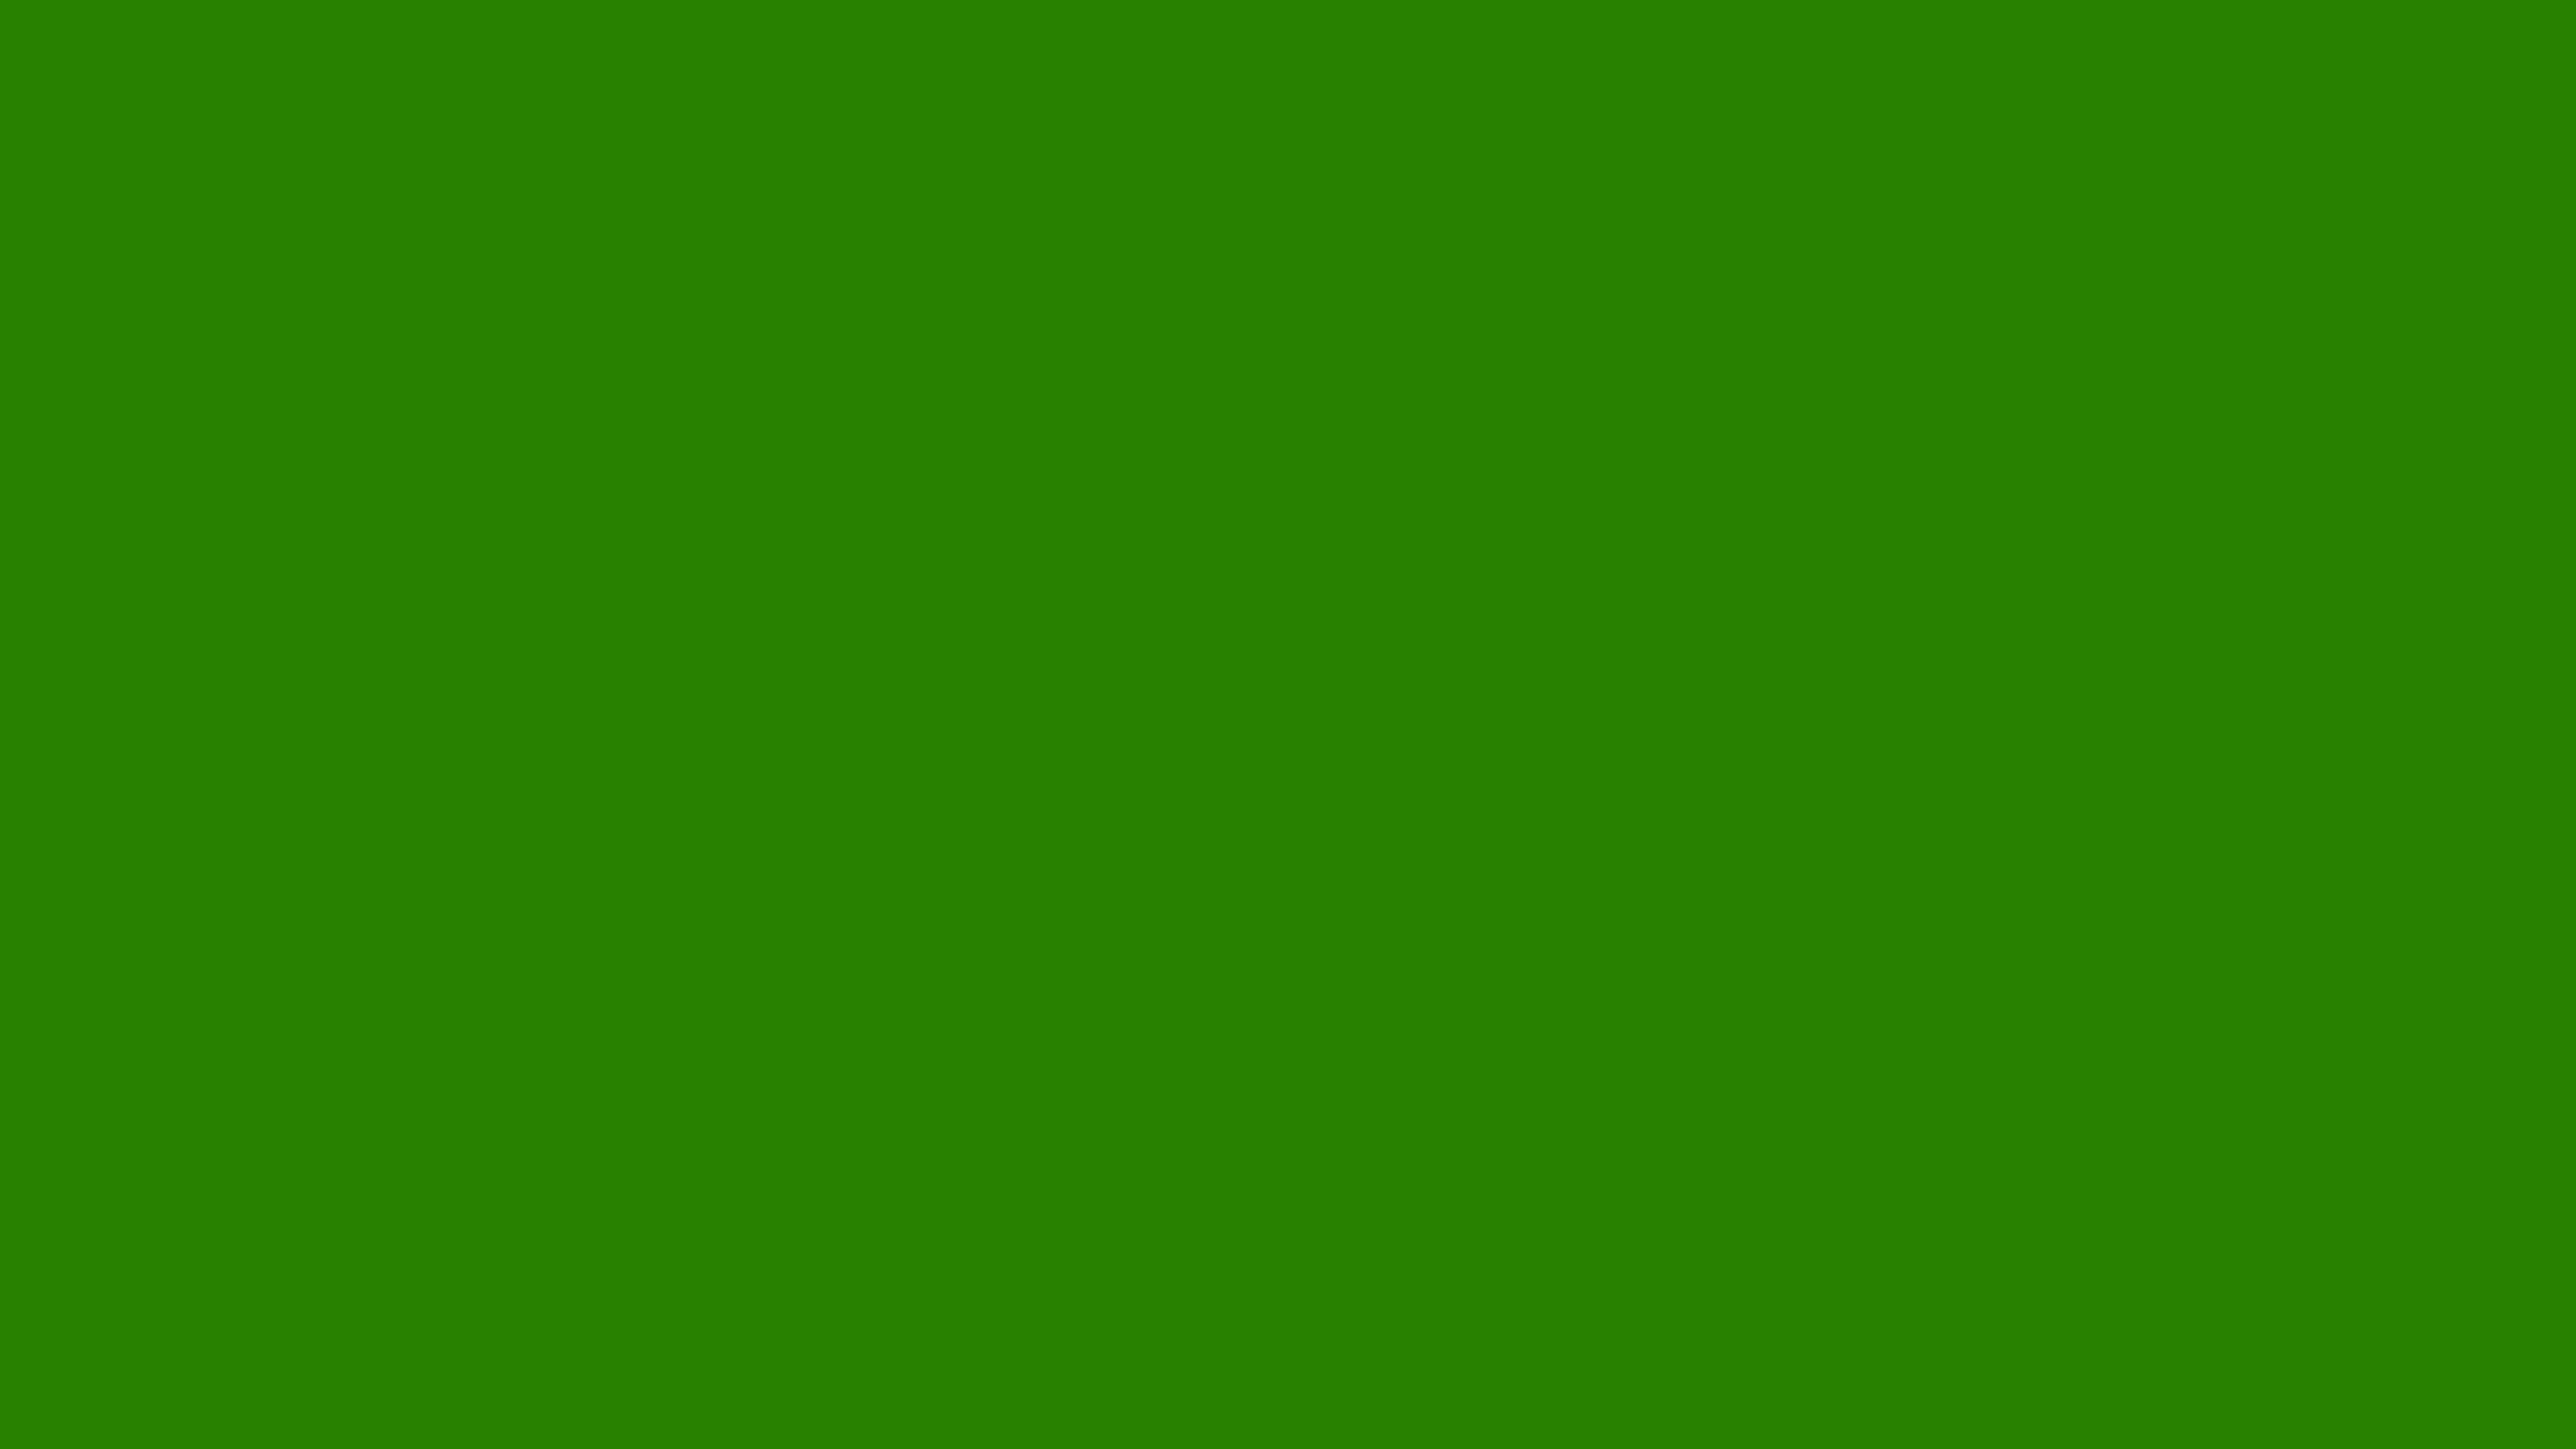 3840x2160 Napier Green Solid Color Background